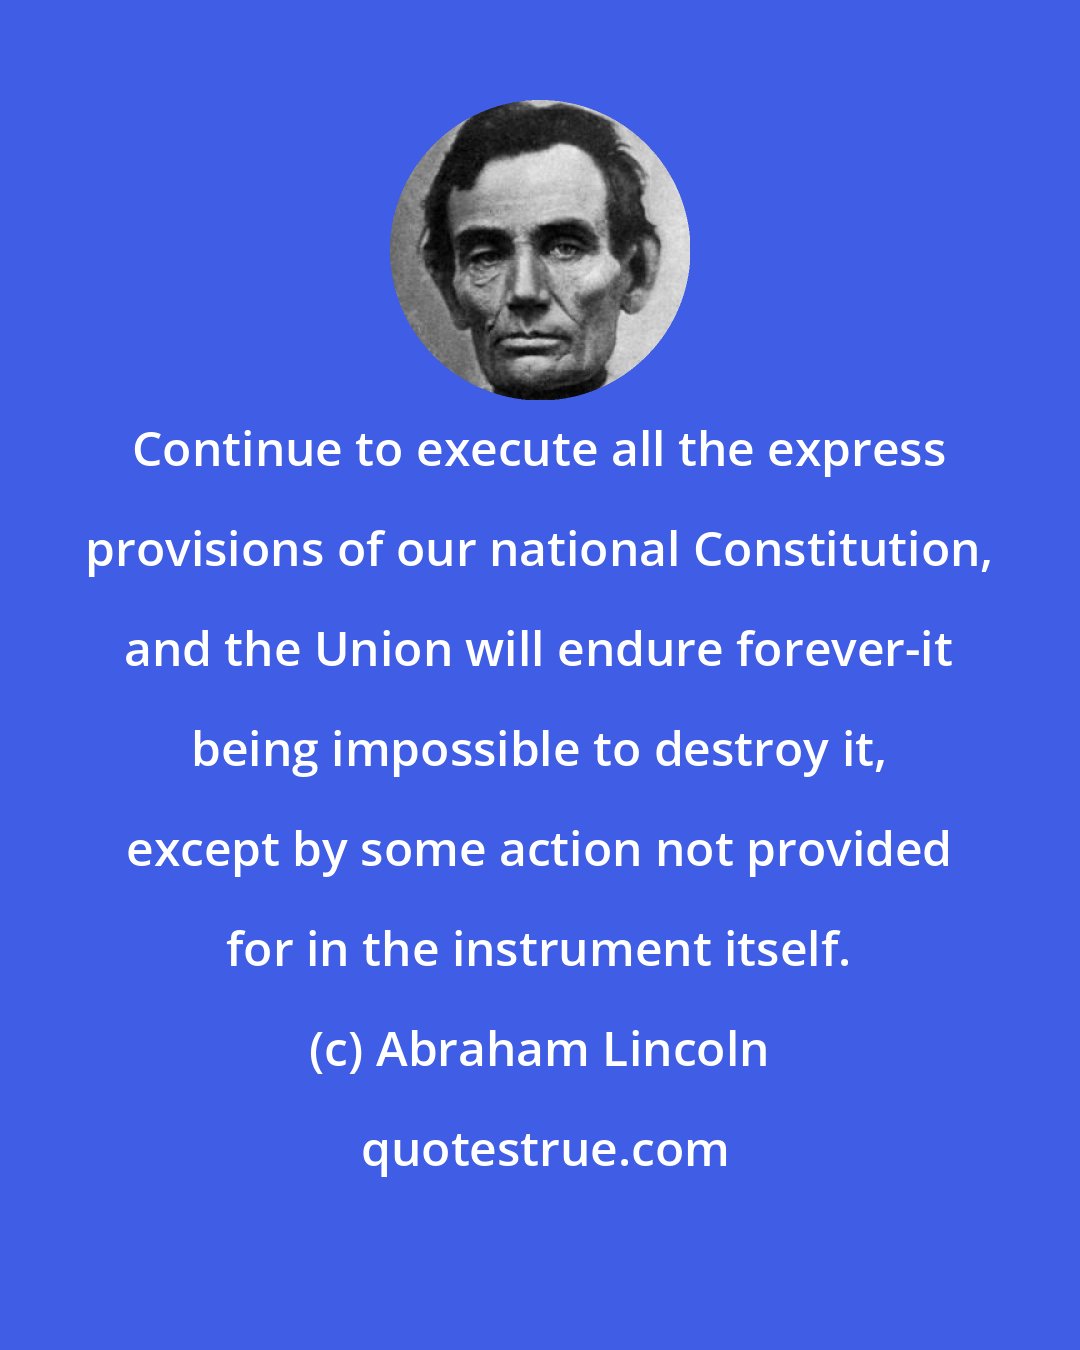 Abraham Lincoln: Continue to execute all the express provisions of our national Constitution, and the Union will endure forever-it being impossible to destroy it, except by some action not provided for in the instrument itself.